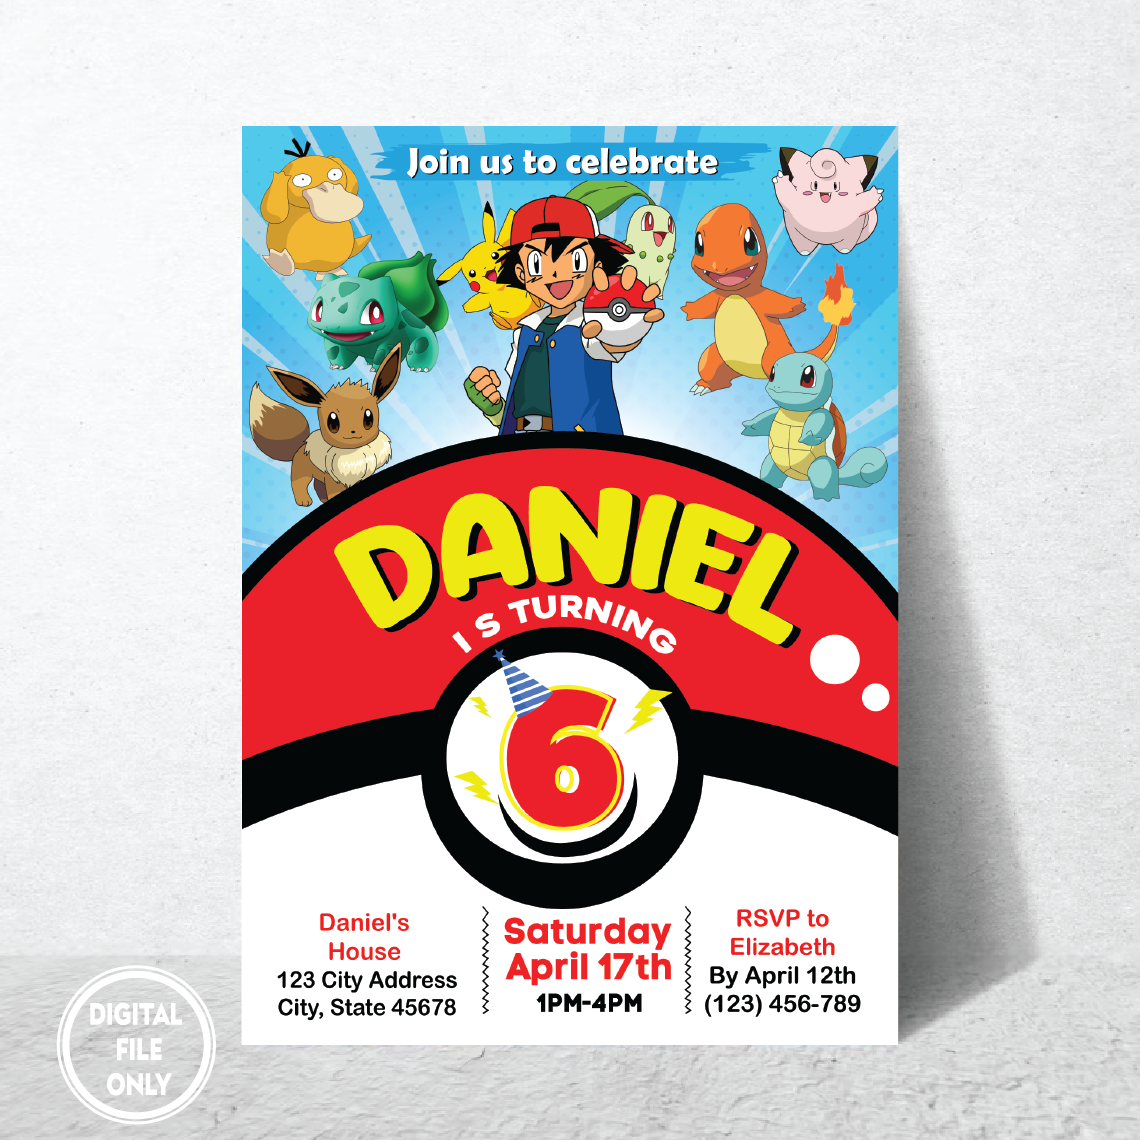 Personalized File Pokemon Birthday Invitations, Pokemon Birthday Invites, Pokemone Invitation, Pikachu Invitation, Pikachu Party Invite, Instant Download. PNG File Only